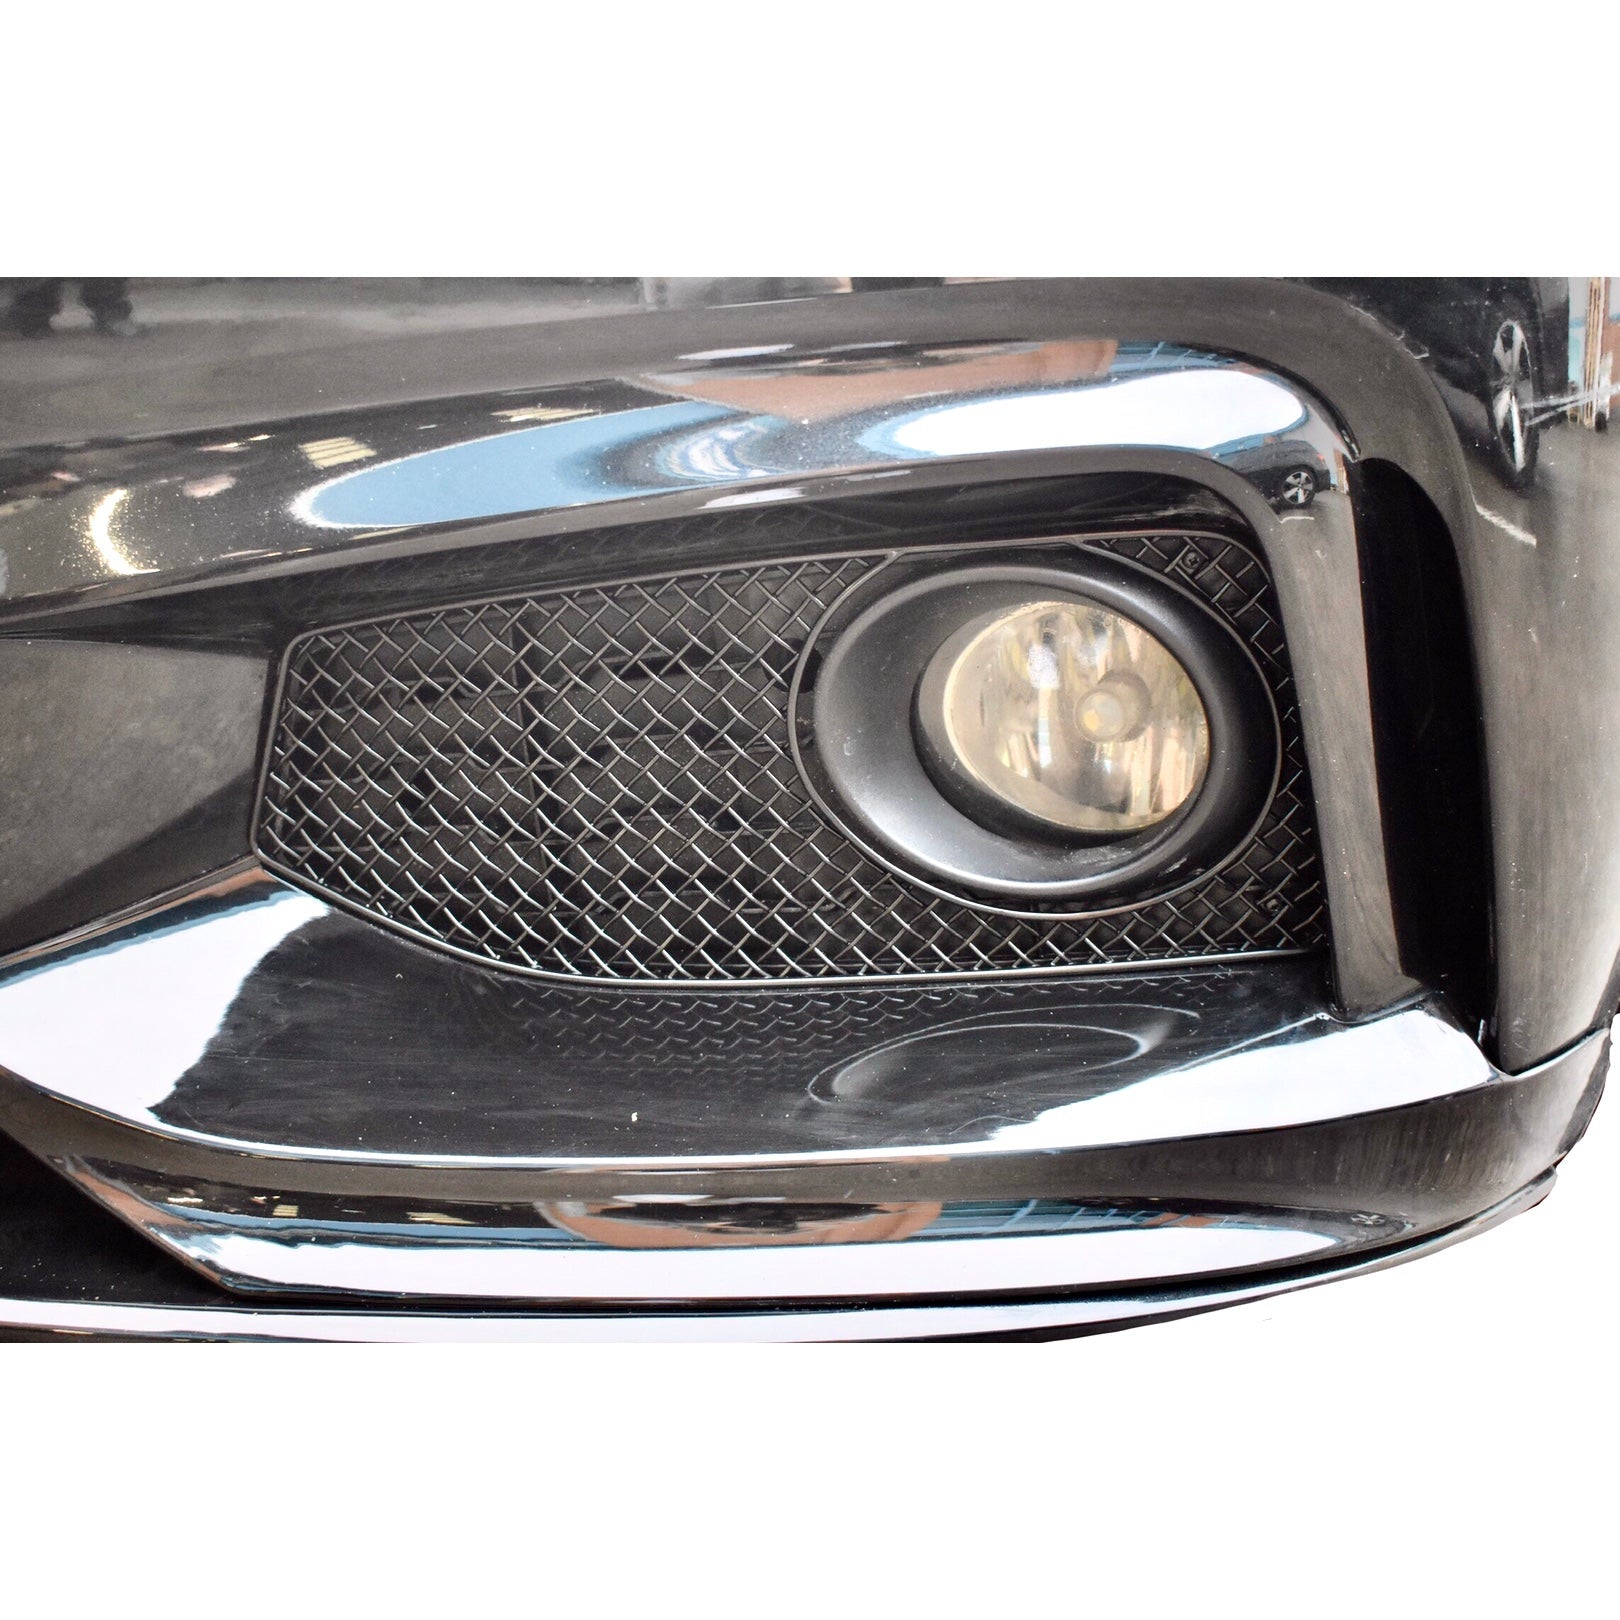 Zunsport BMW 4 Series F32, F33, F36 M-Sport 2013 - 2020 Outer Grille Set